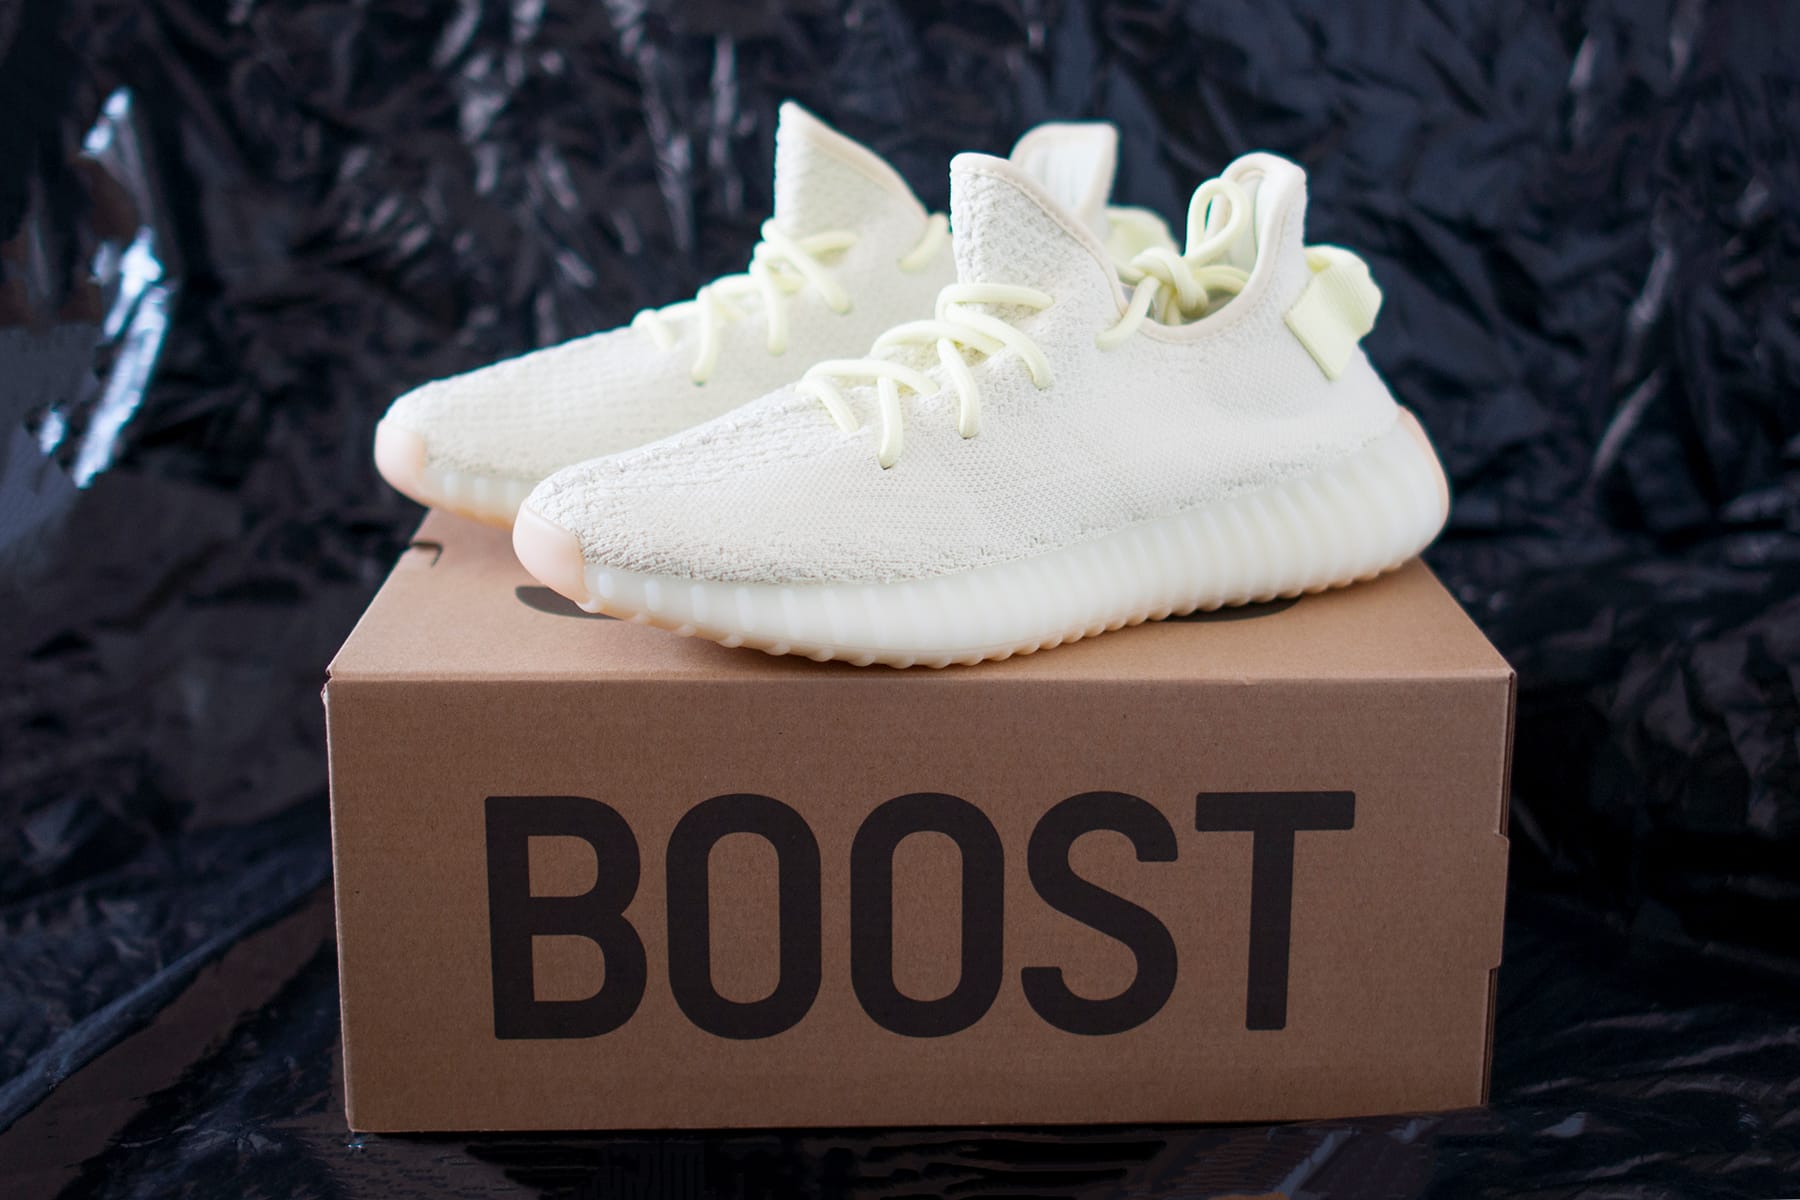 yeezy butter size 6